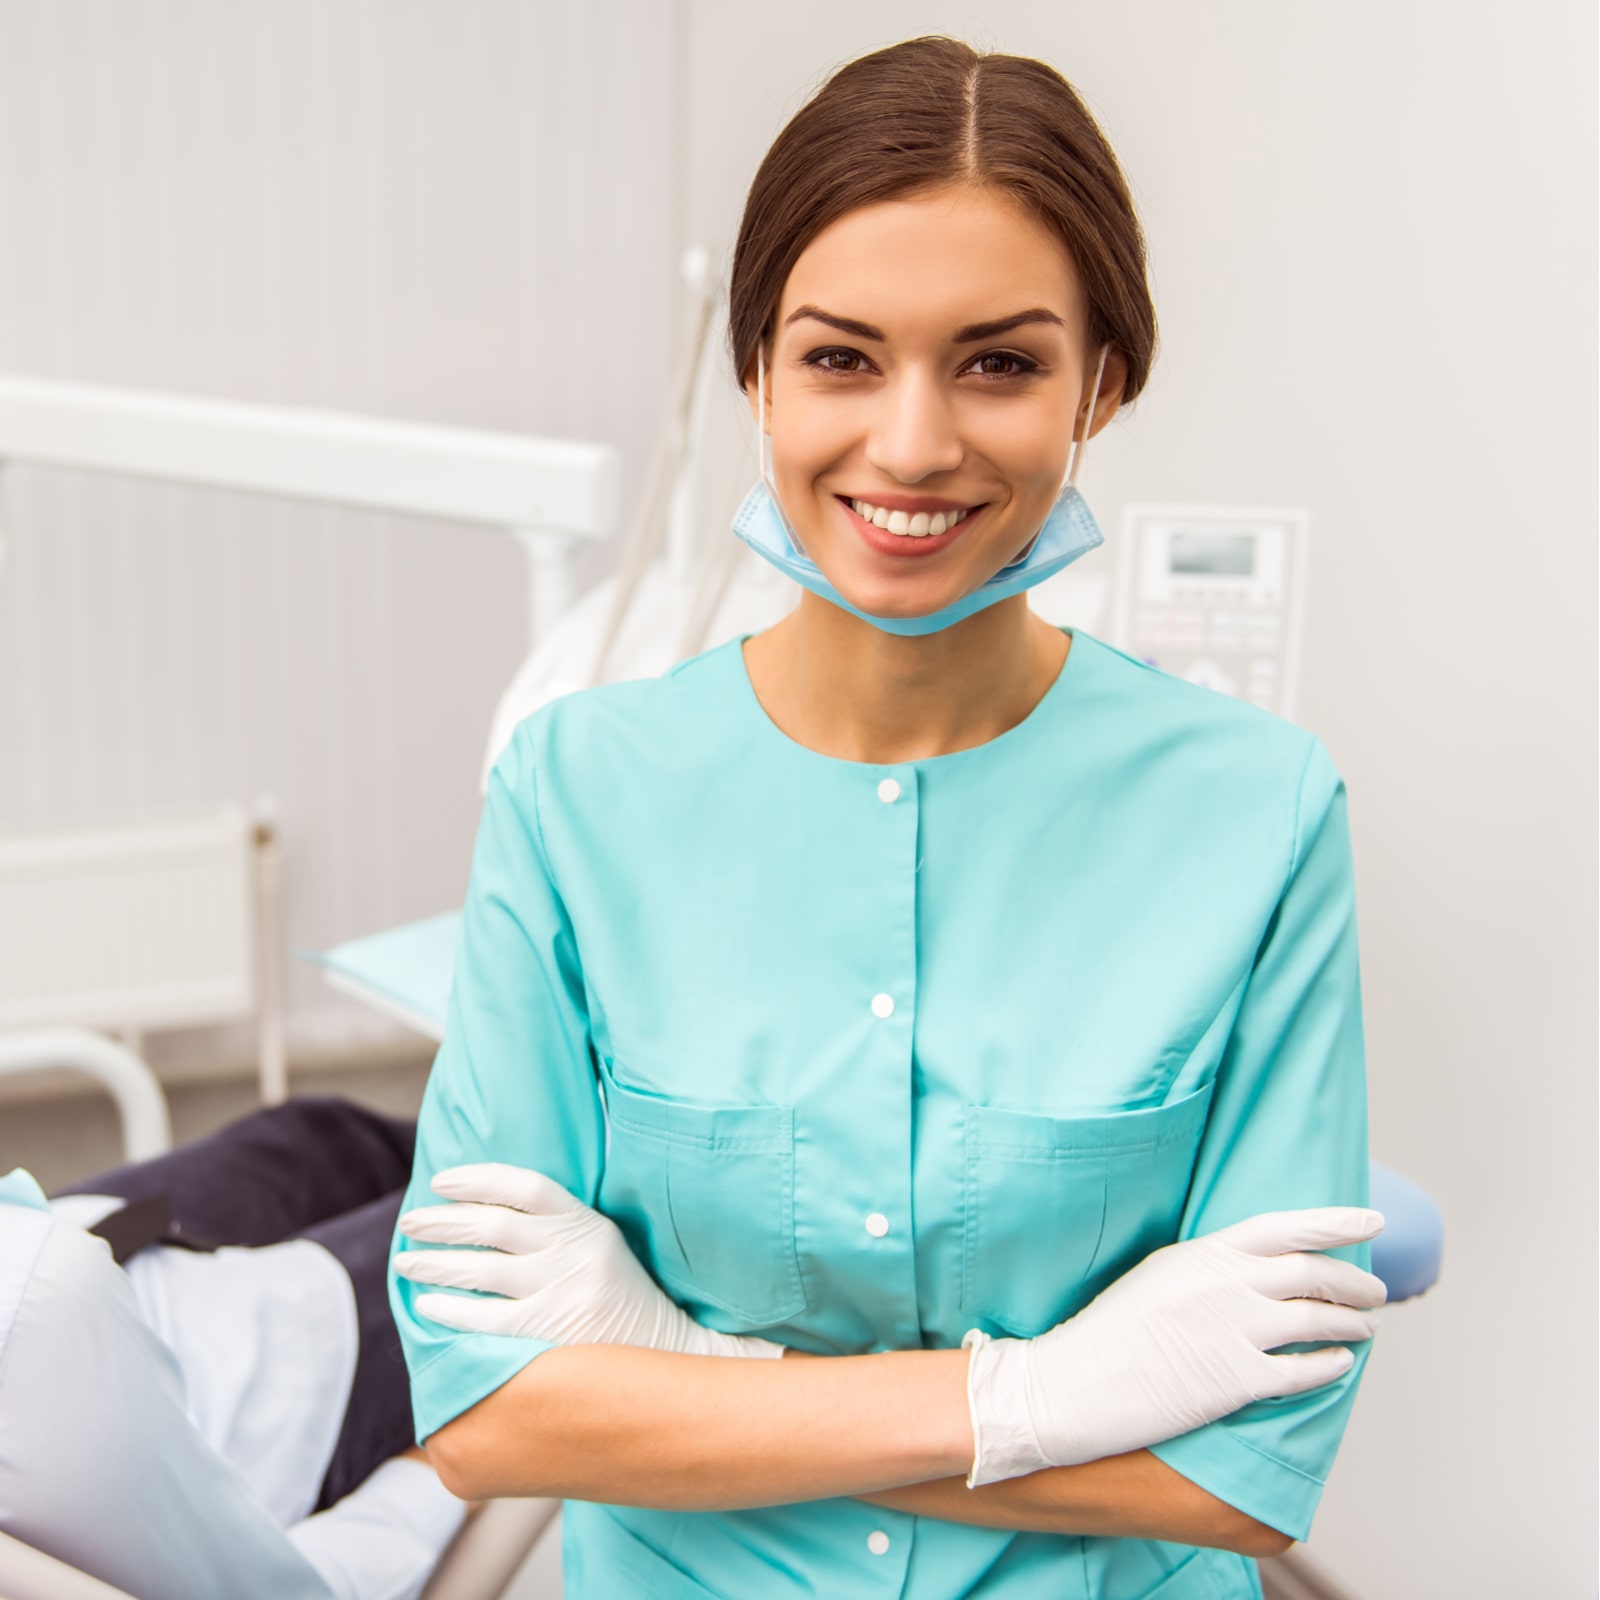 smiling young dentist with folded hands